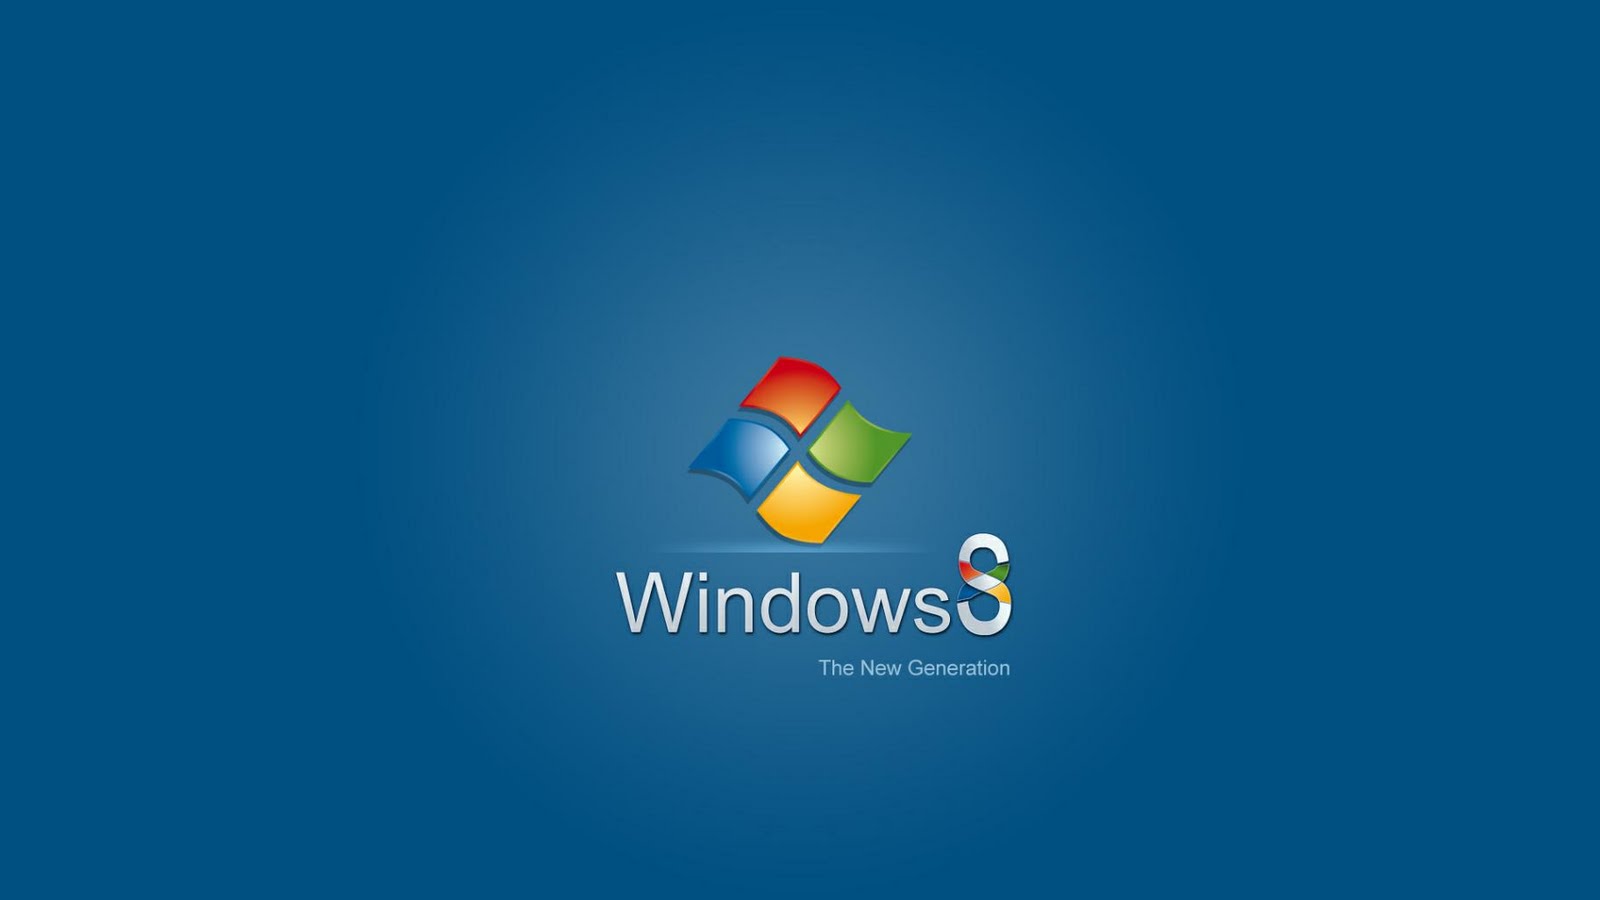 ... download/free-windowsstarter-edition-on-how-to-change-your-windows-7